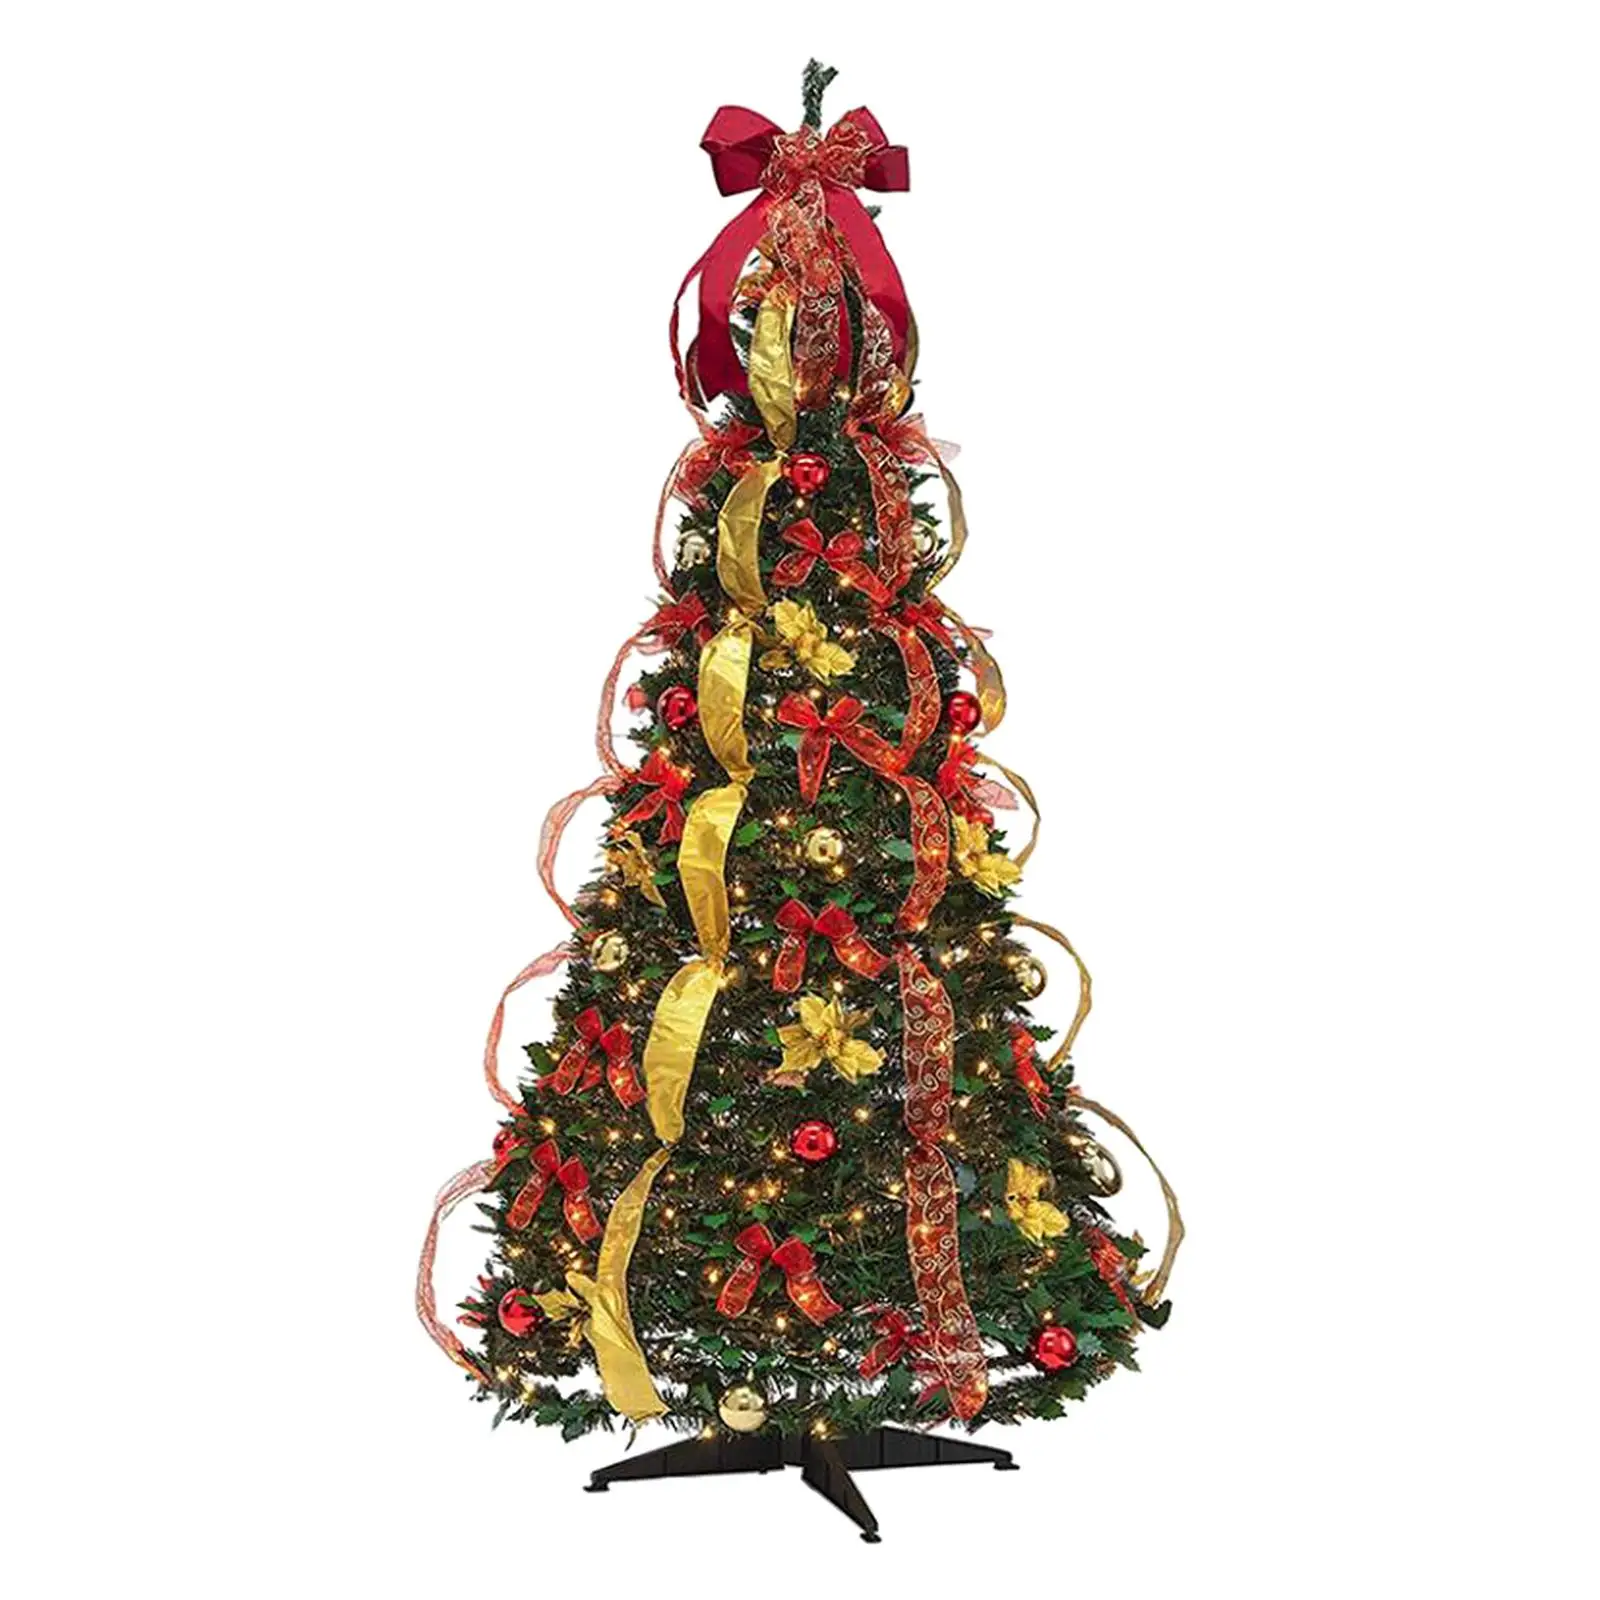 Foldable Christmas Tree 6 ft Easy Assembly Holiday Party Decor Ornaments Lighted Xmas Tree Pre Lit Christmas Tree Decoration